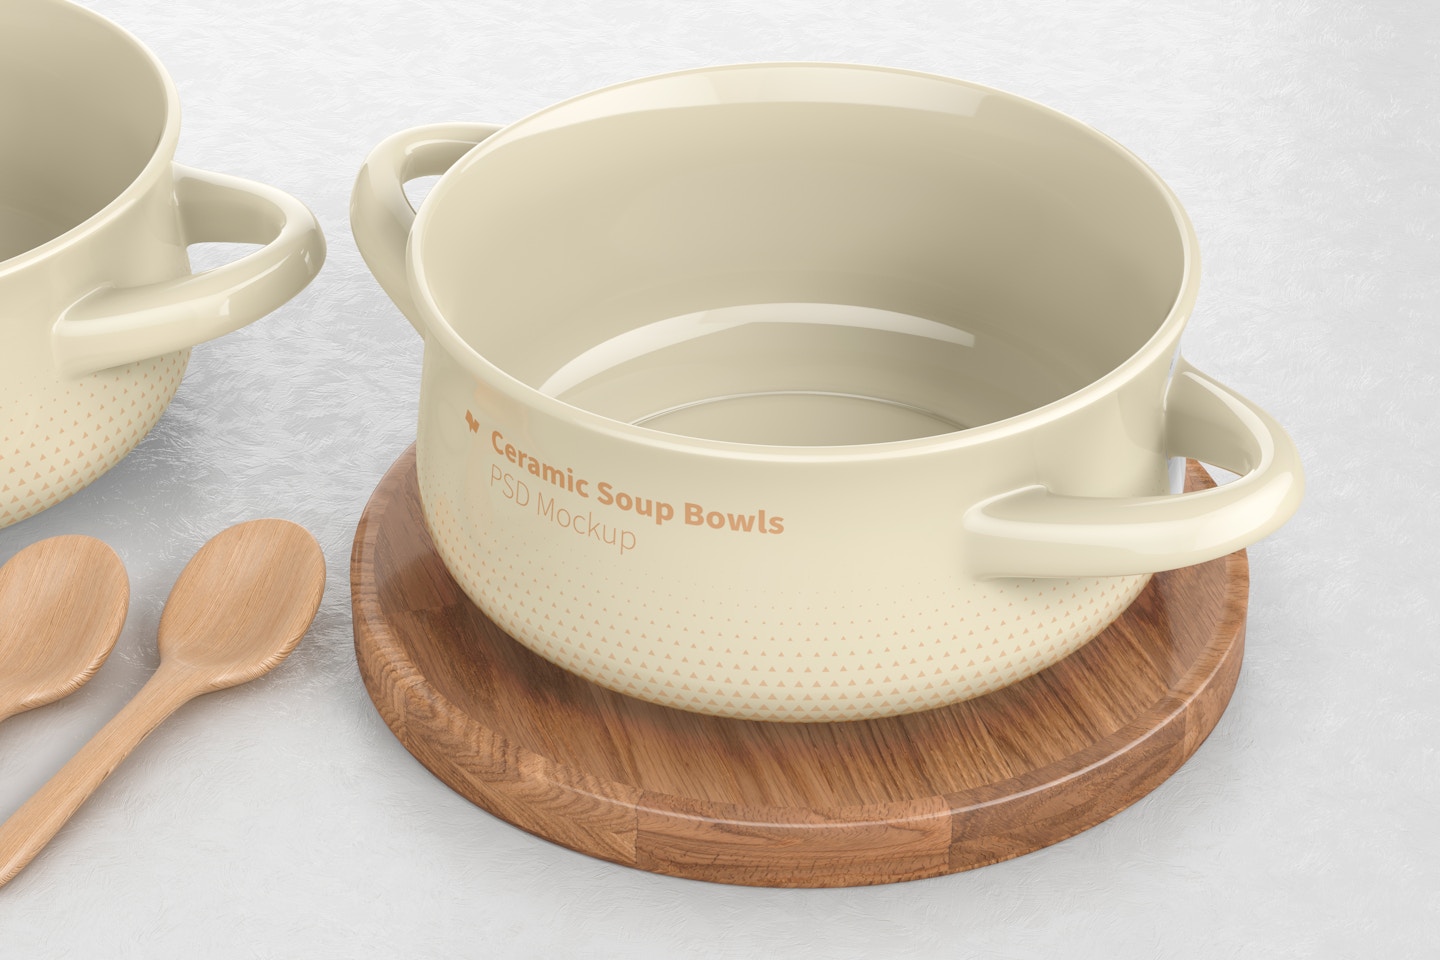 Ceramic Soup Bowls with Handles Mockup, on Surface